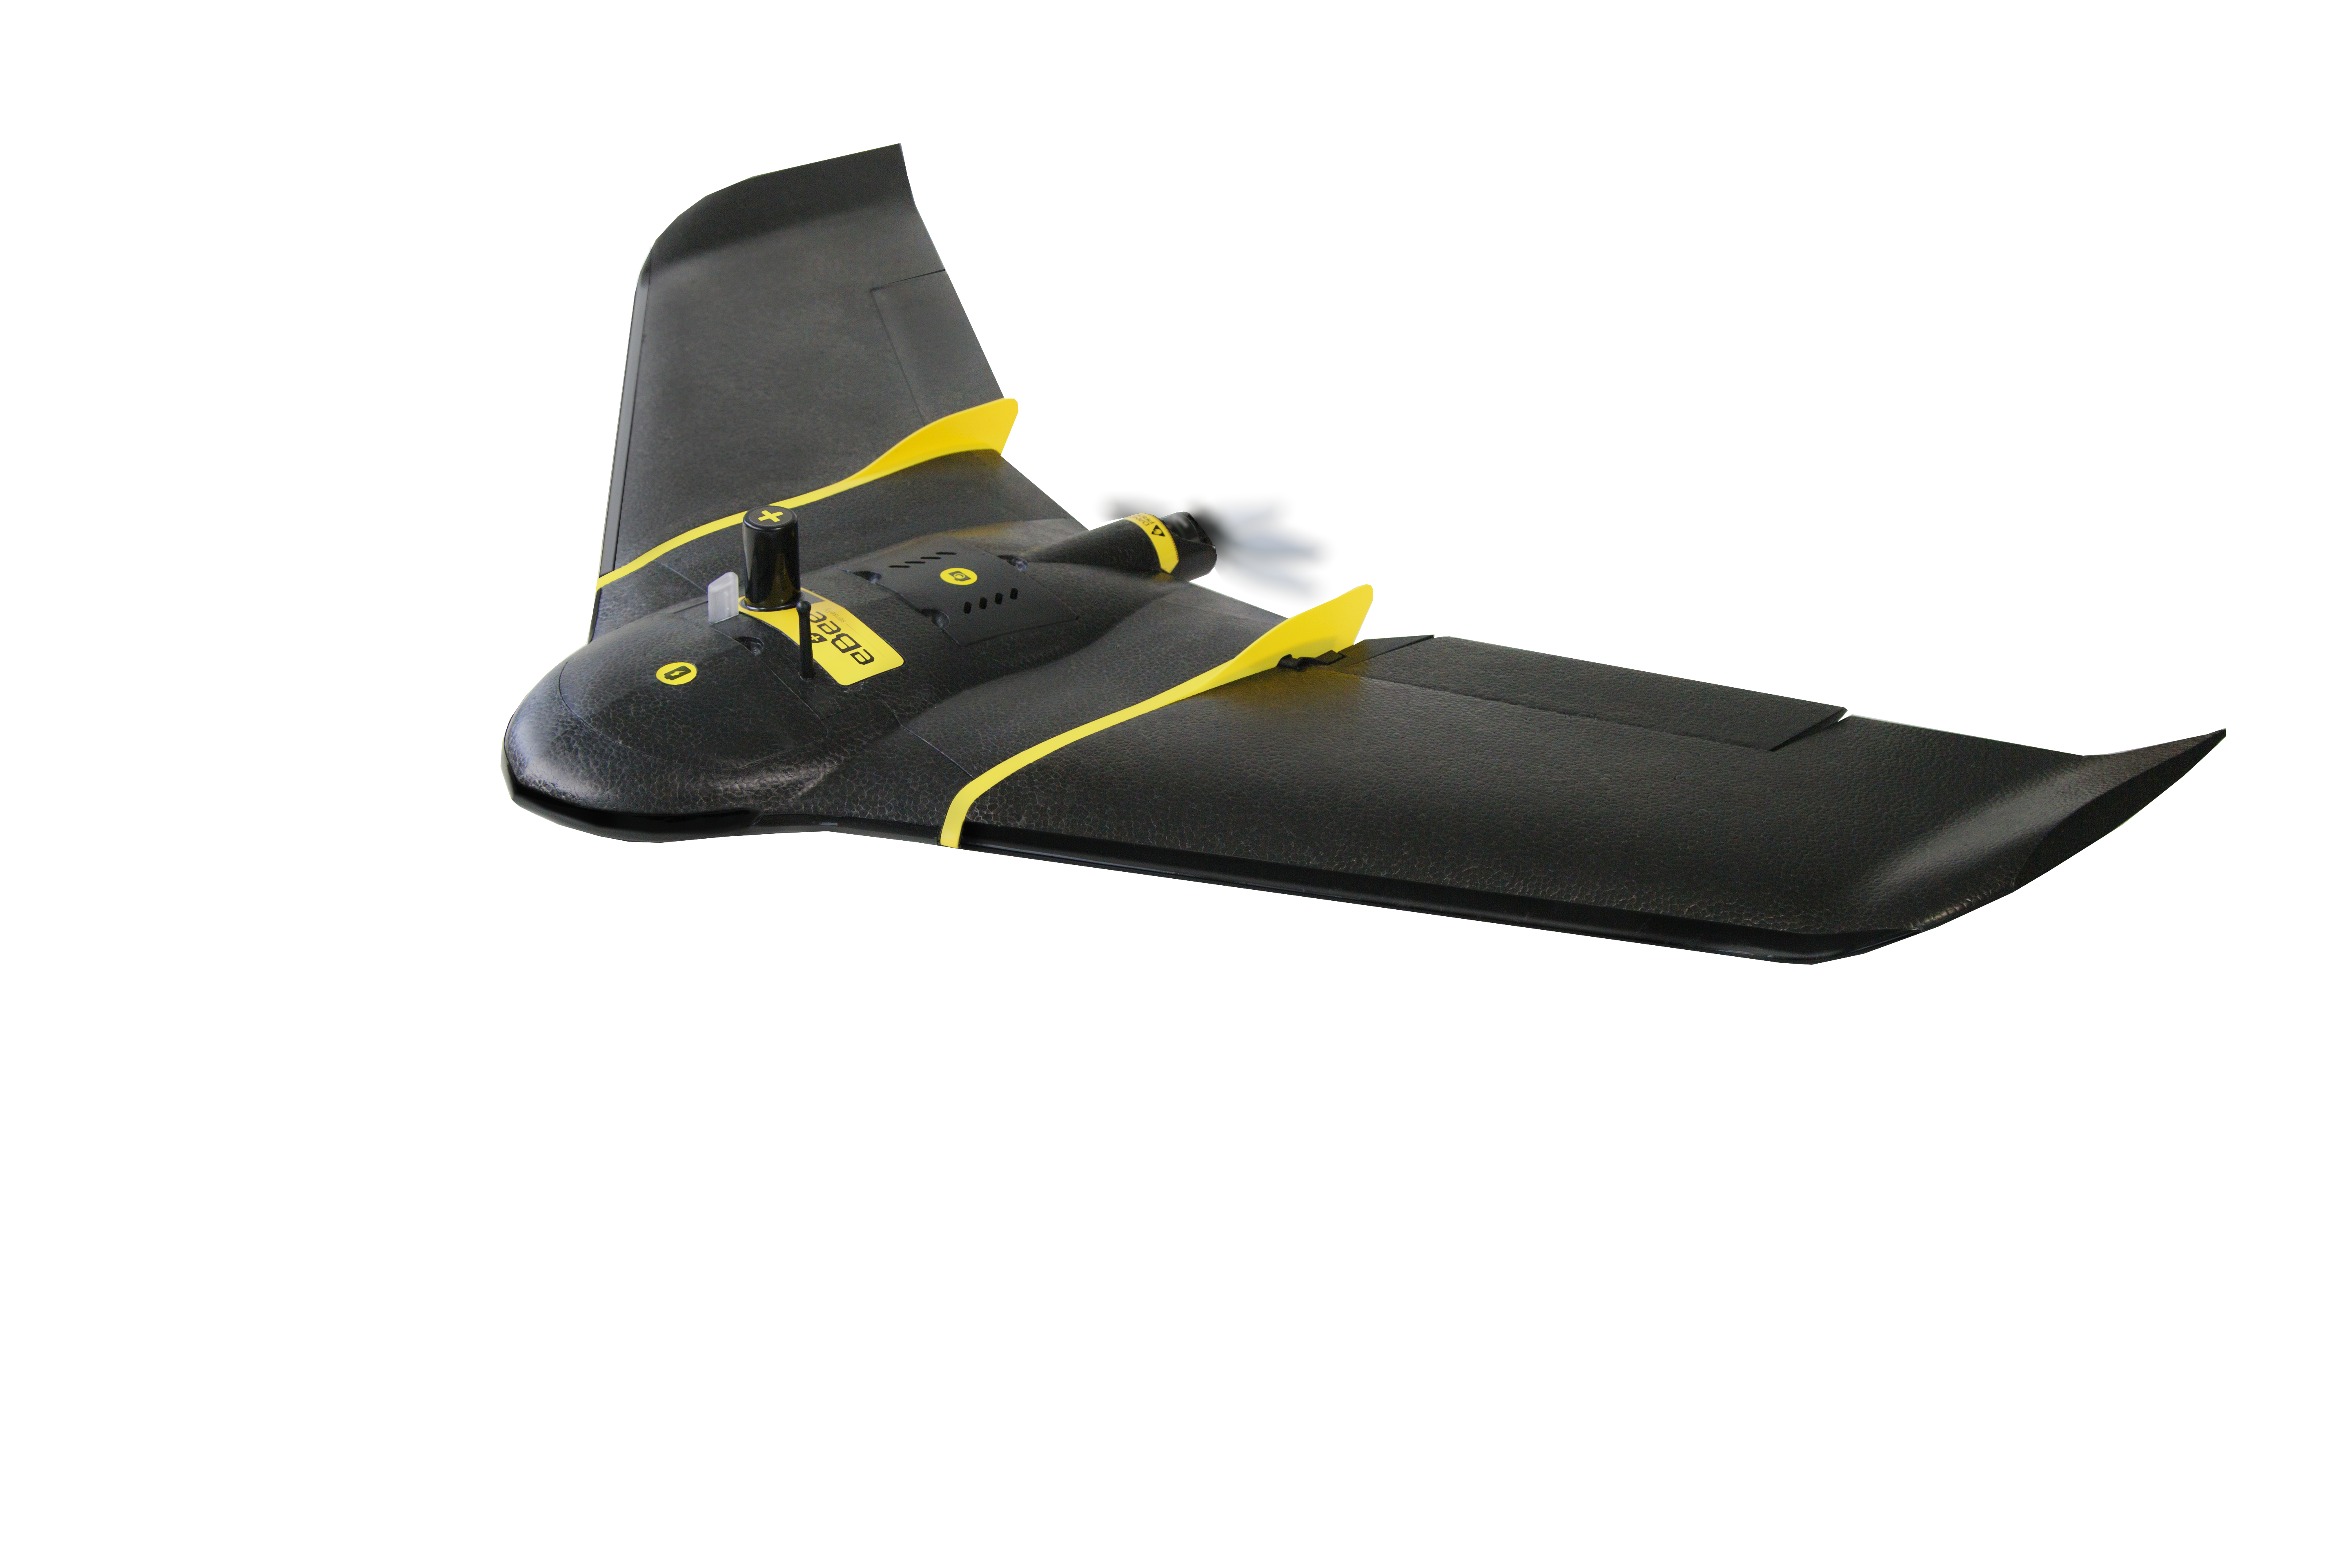 SenseFly's eBee Plus: More Features, Not More Weight